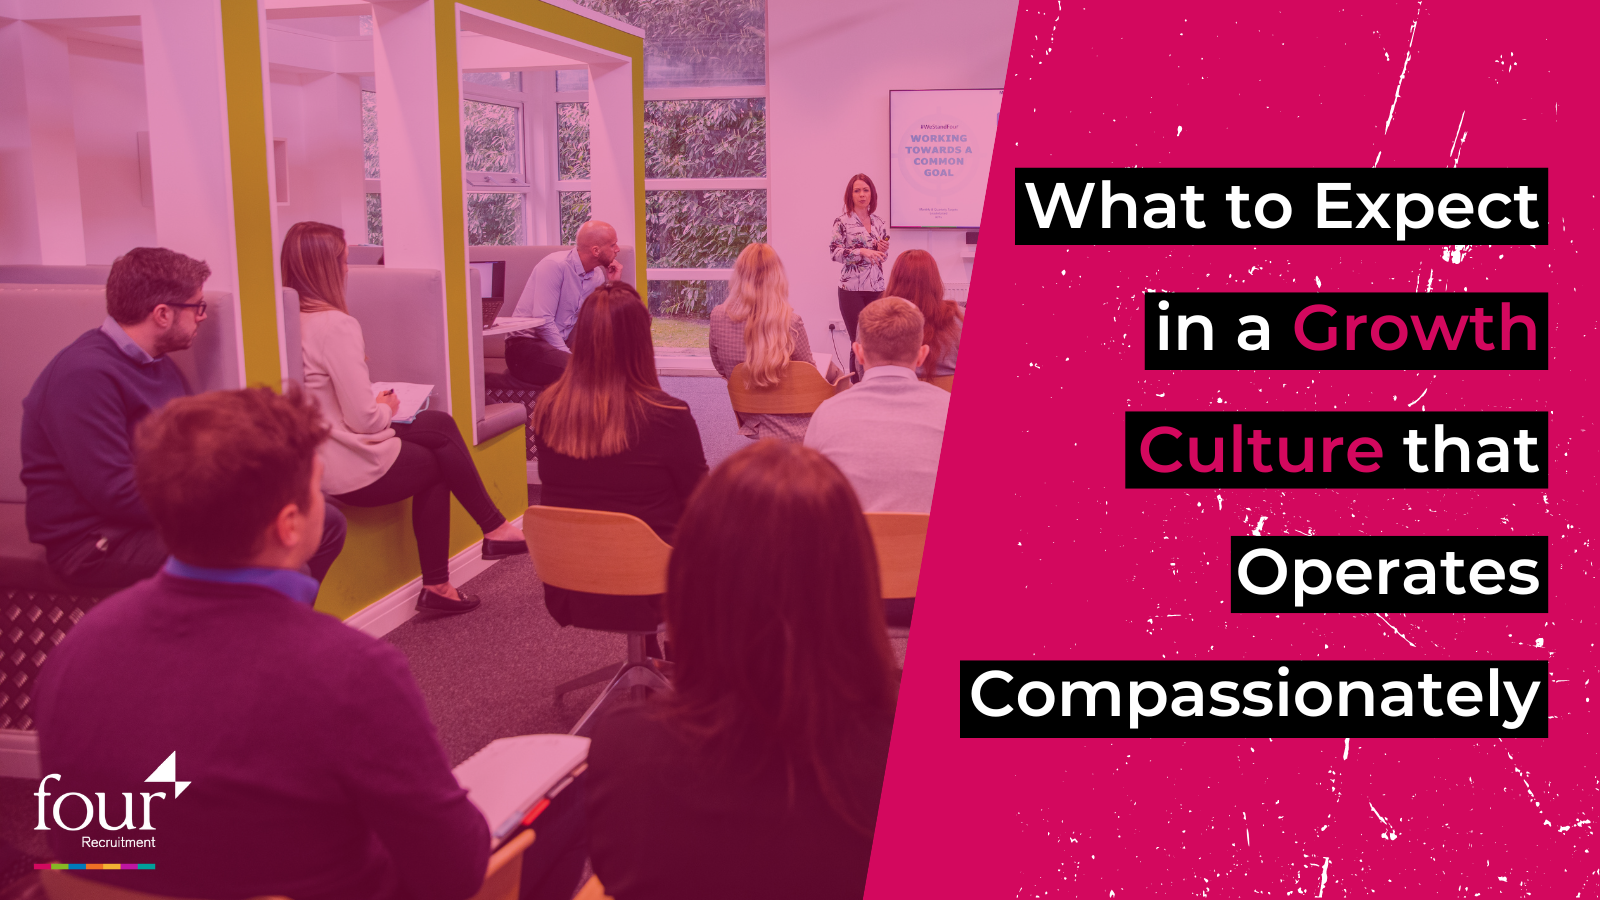 What to Expect in a Growth Culture that Operates Compassionately